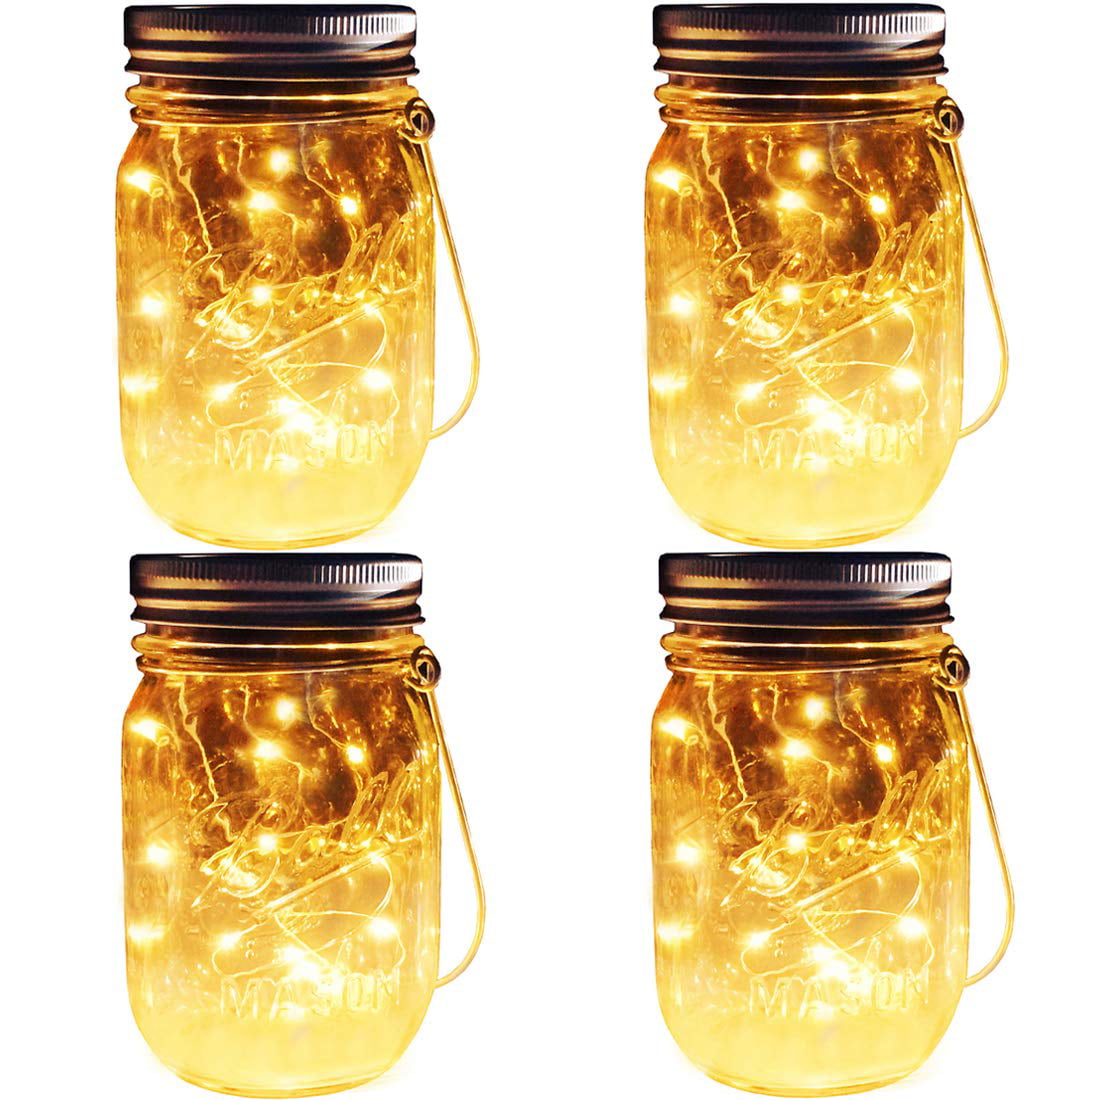 8 Pack 10 LED Waterproof Fairy Star Firefly String Lights with 8 Hangers for Mason Jar Garden Wedding Christmas Party Decor Cold White Jar Not Included Cynzia Solar Mason Jar Lights 